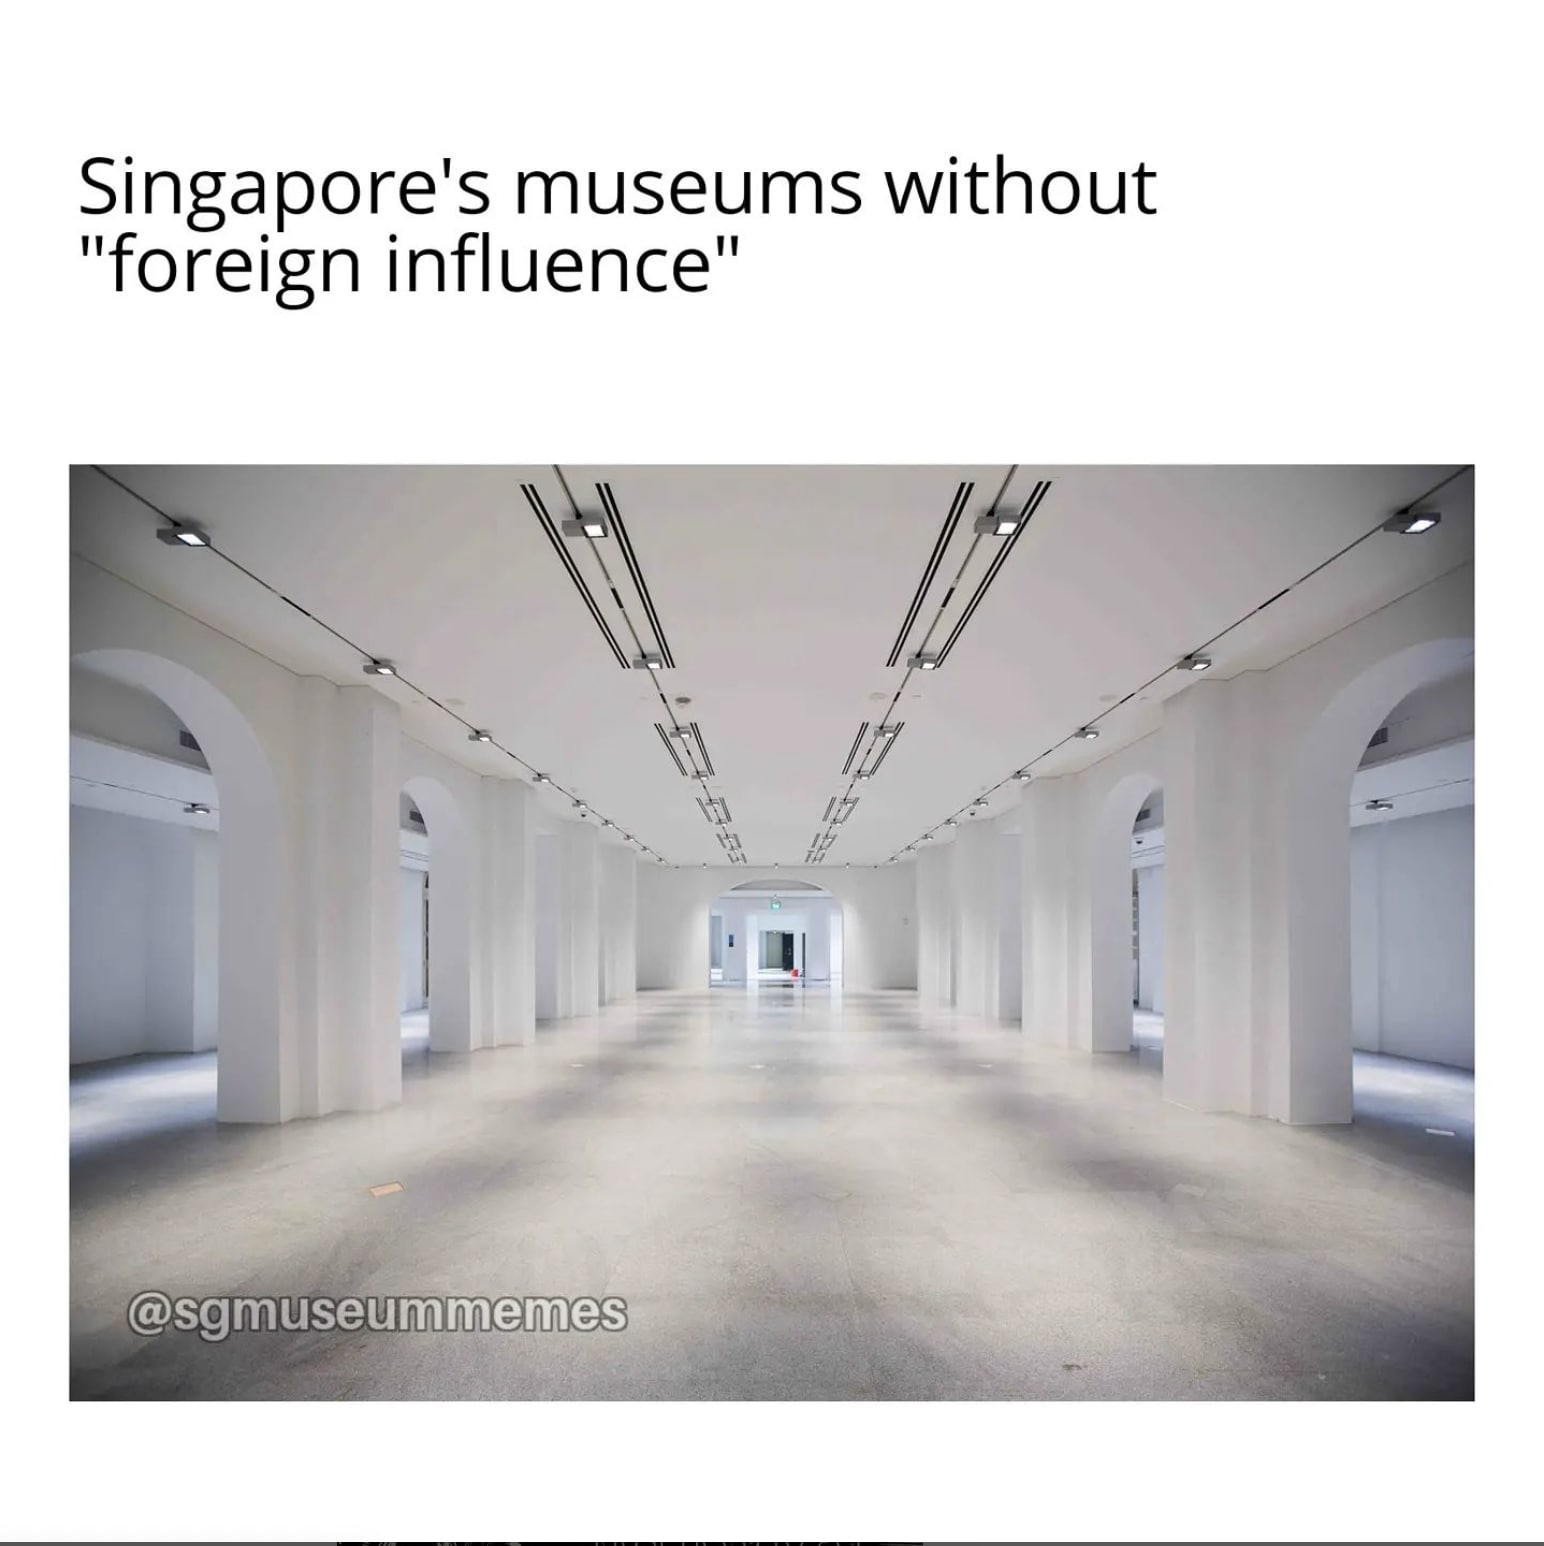 The image features a photograph of a large white hallway with multiple pillars. The title reads "Singapore's museums without "foreign influence". A watermark on the photograph reads "sg museum memes".